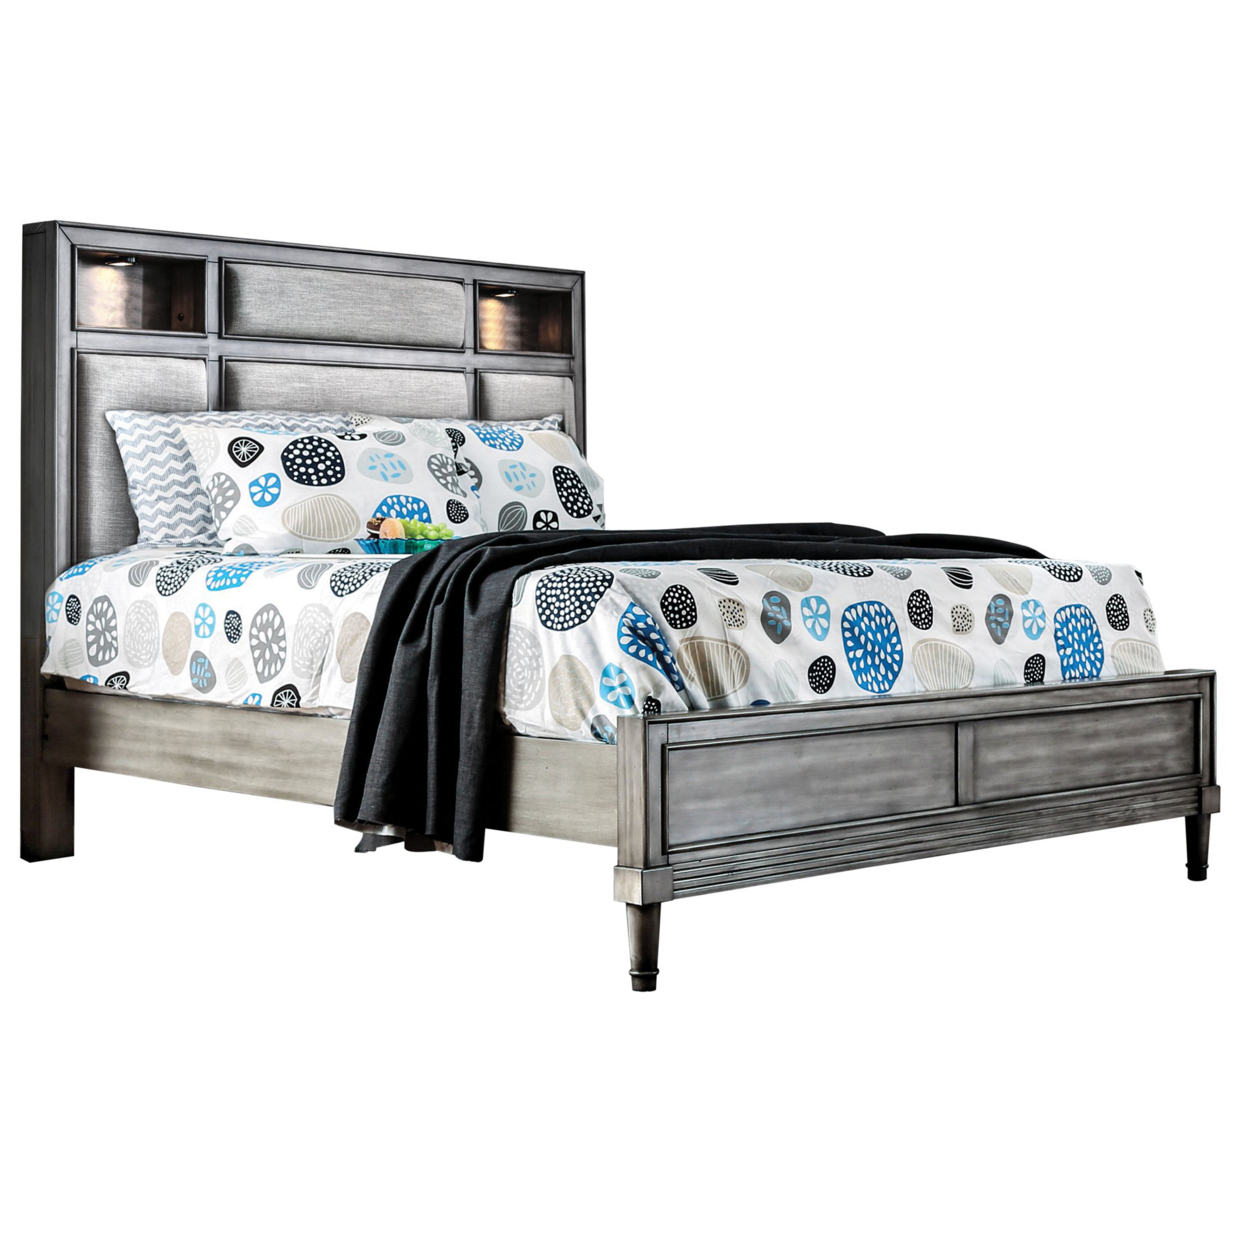 Wooden Queen Size Bed With Padded Fabric Headboard And LED Lights, Gray- Saltoro Sherpi